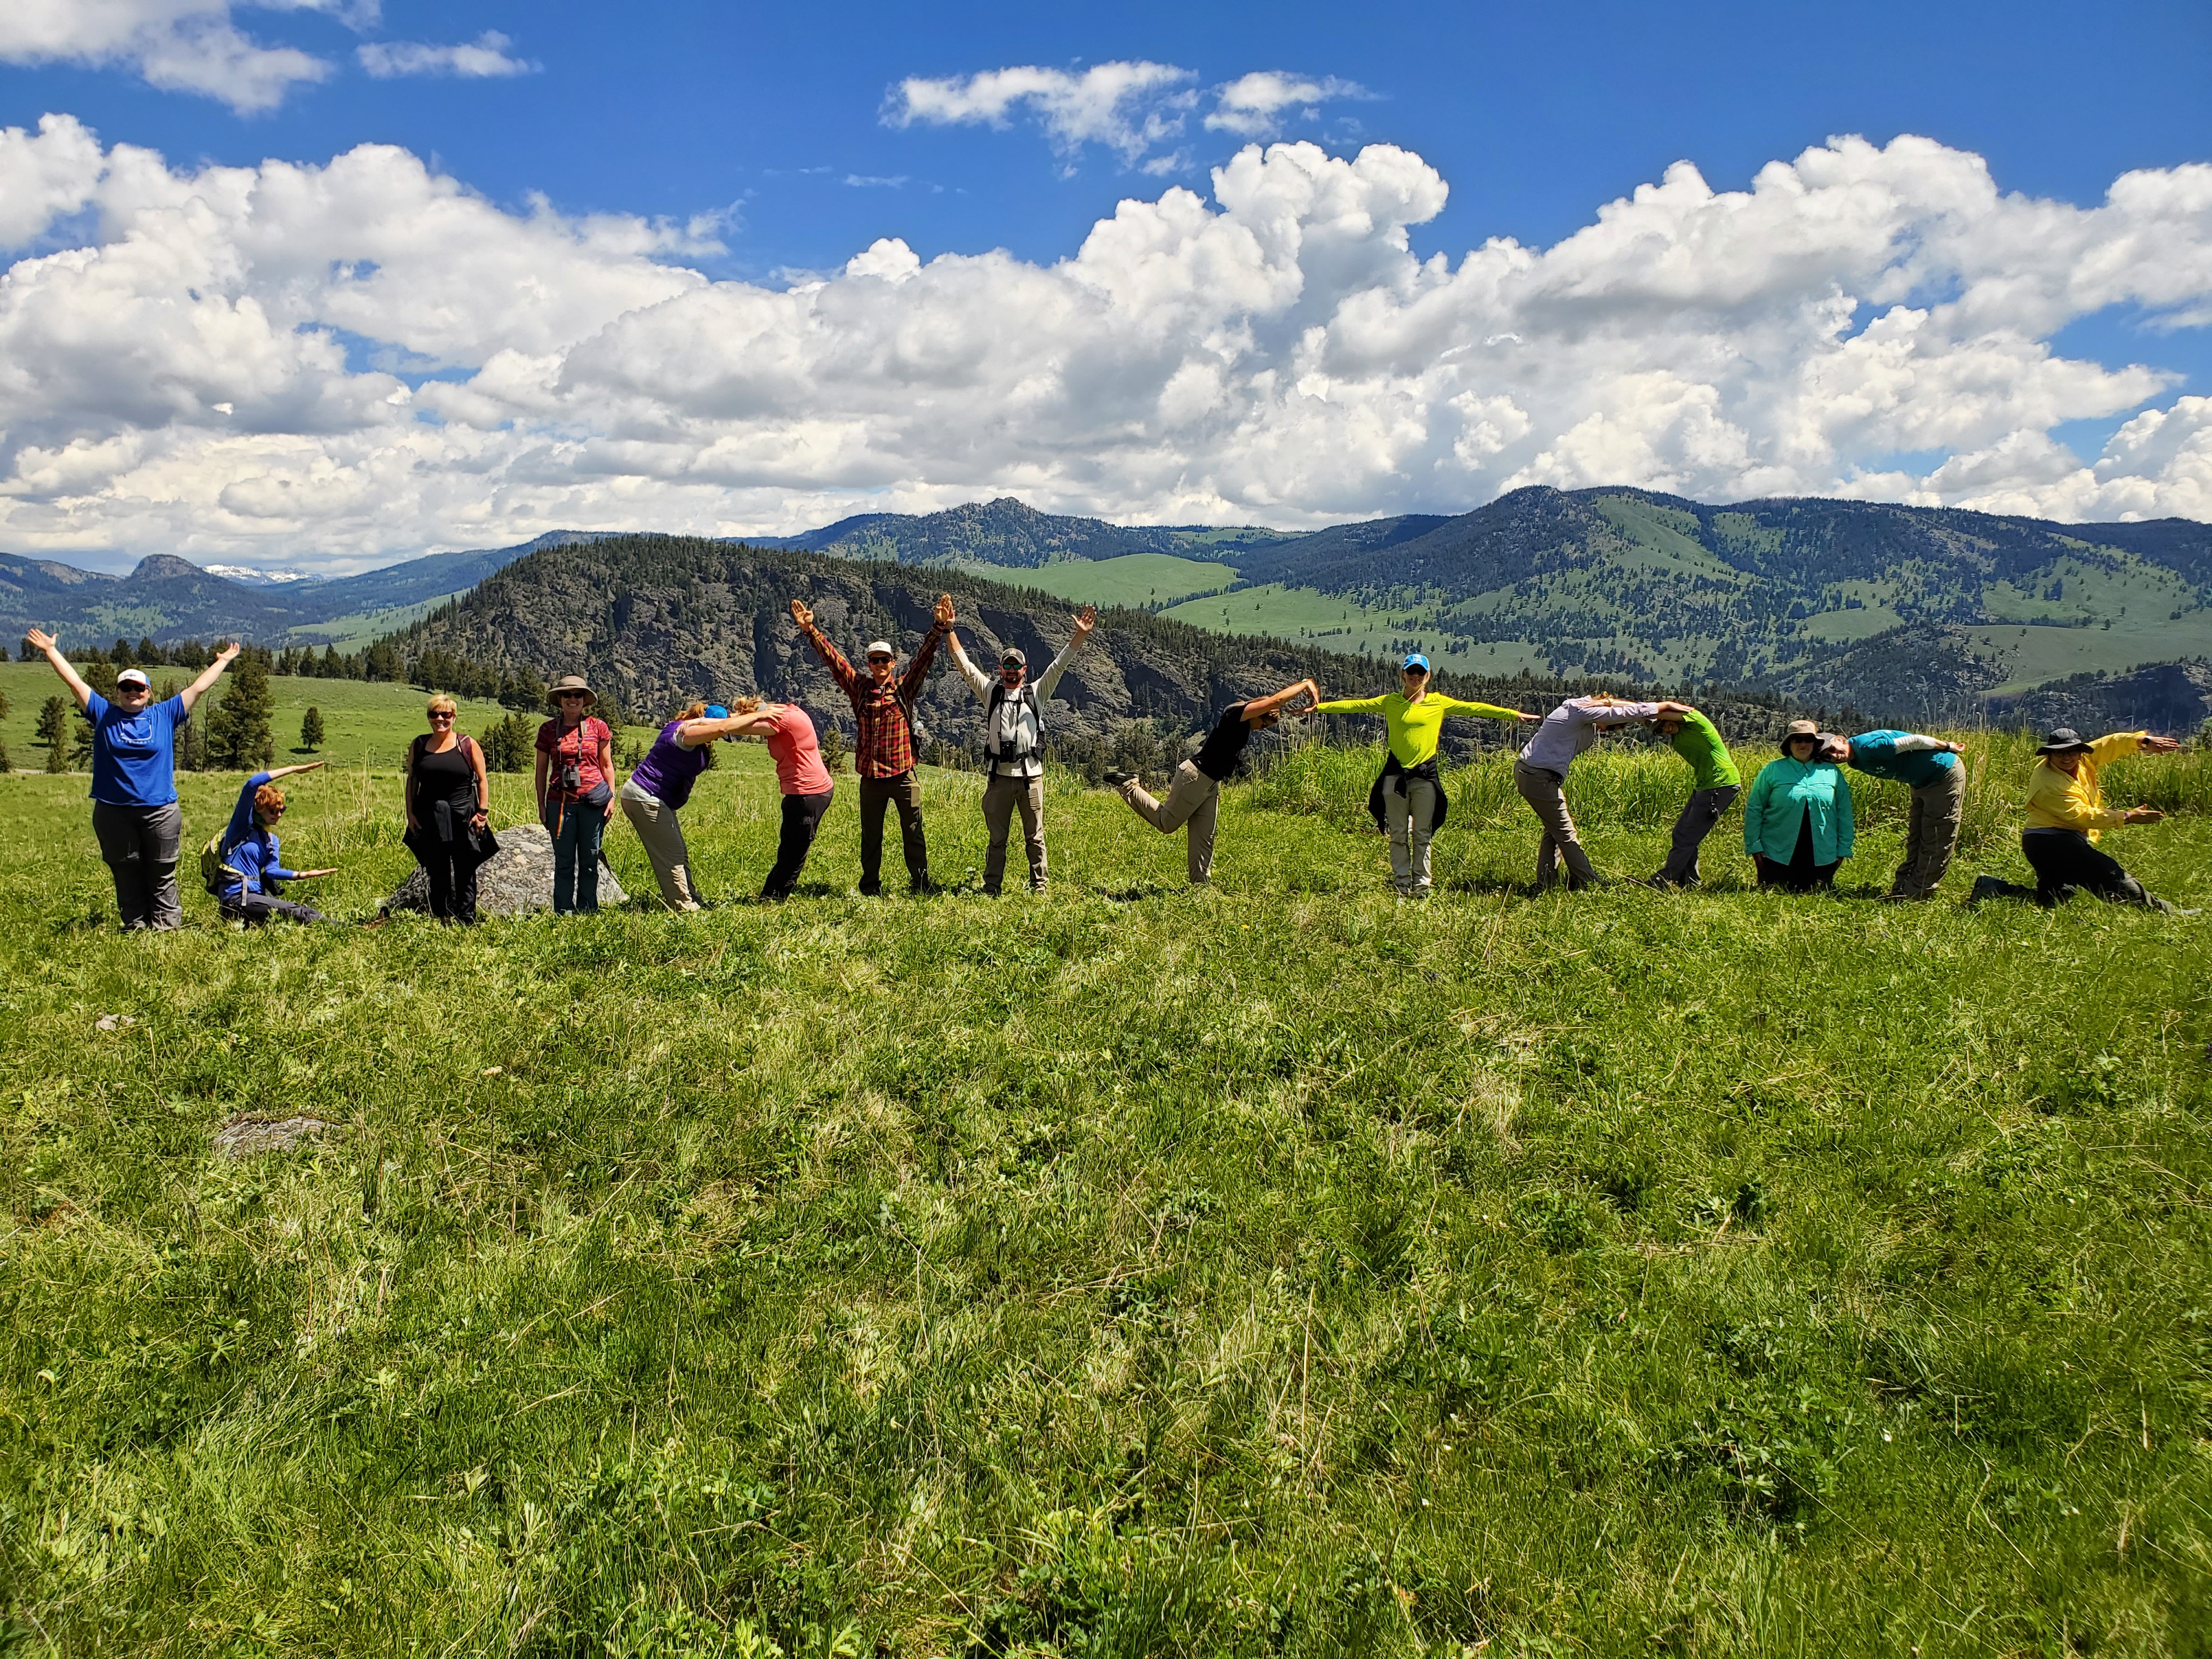 Group spelling out Yellowstone